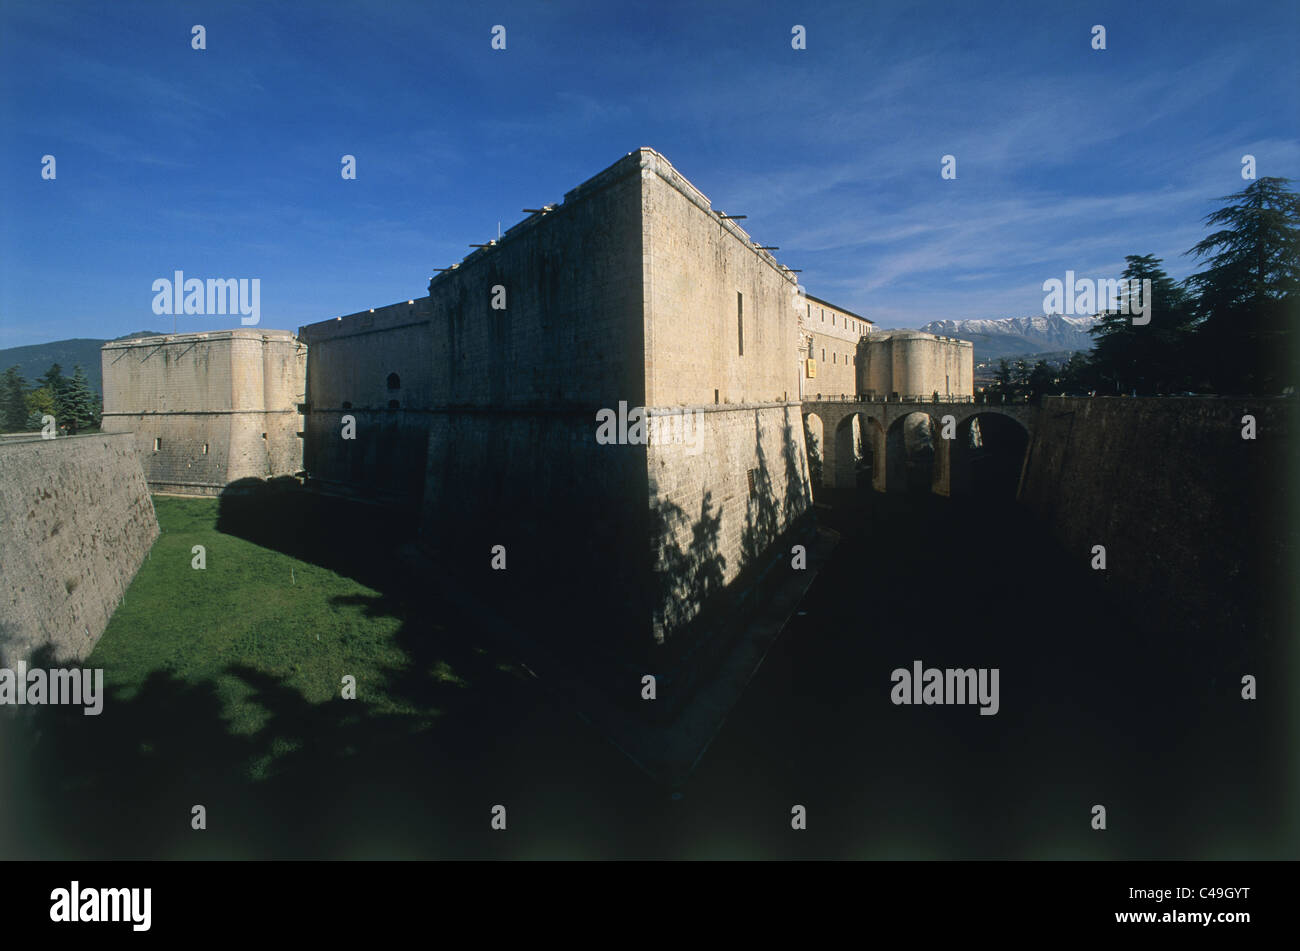 Photograph of a castle in Italy Stock Photo